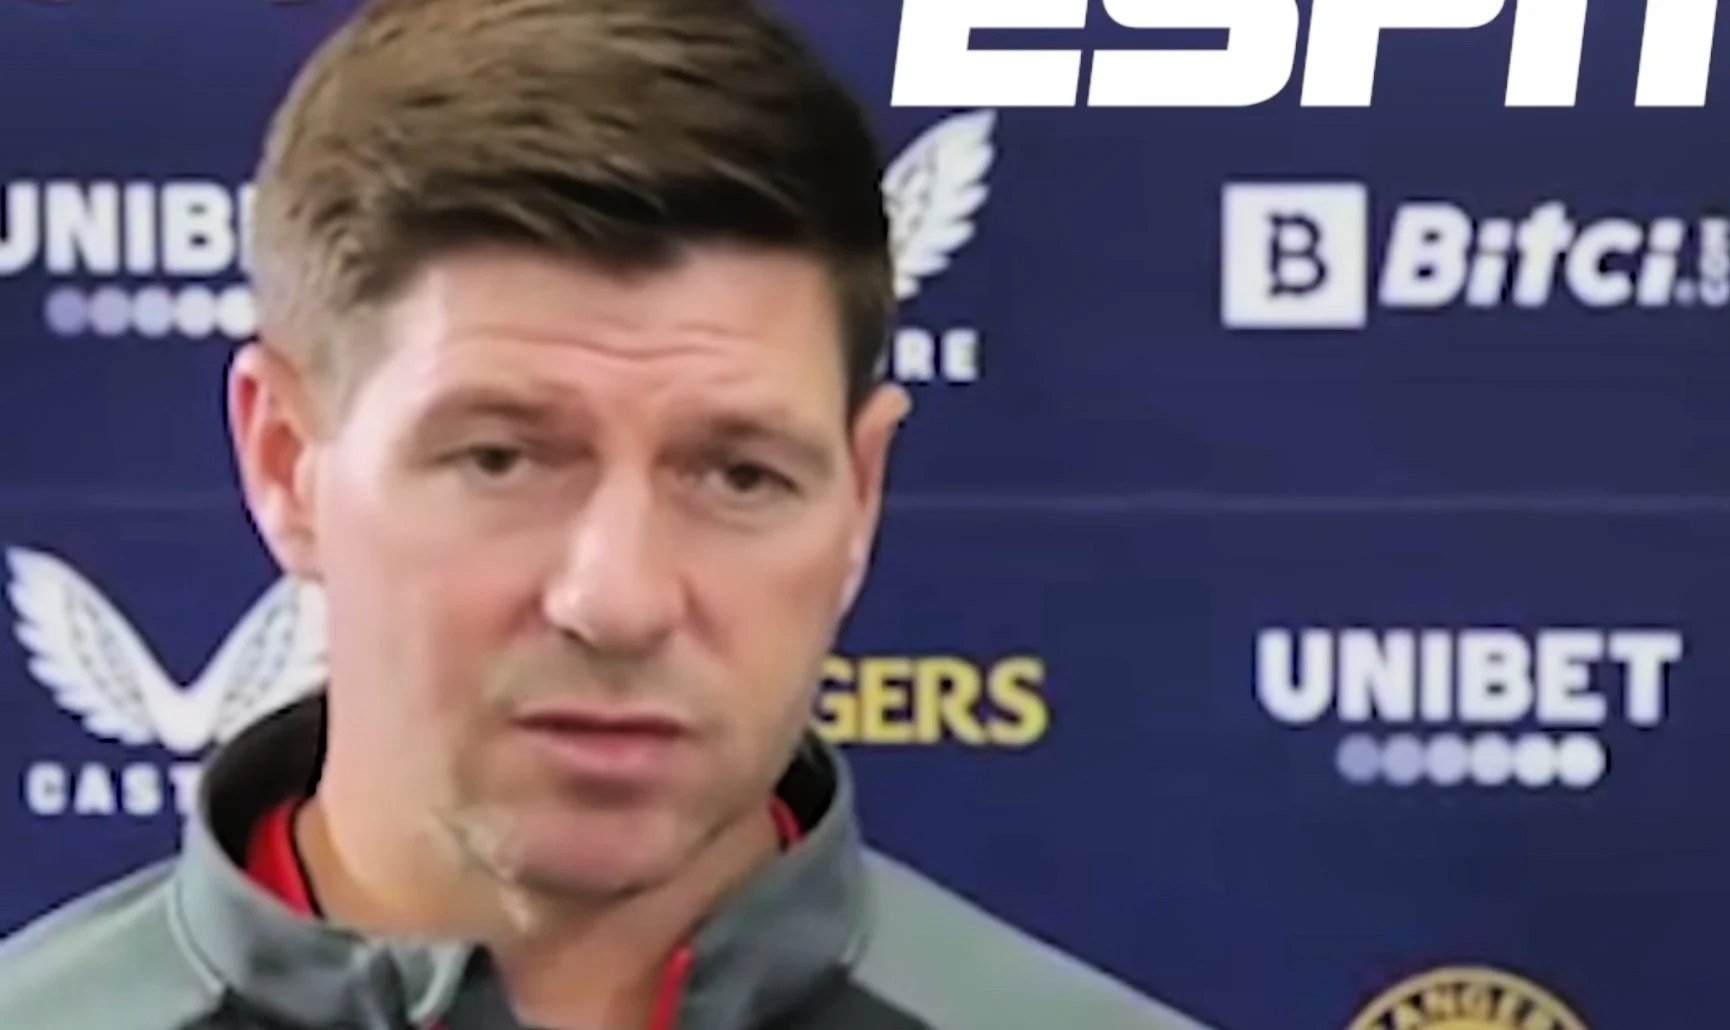 Rangers manager Steven Gerrard says he is Liverpool forever and would never take the Everton job